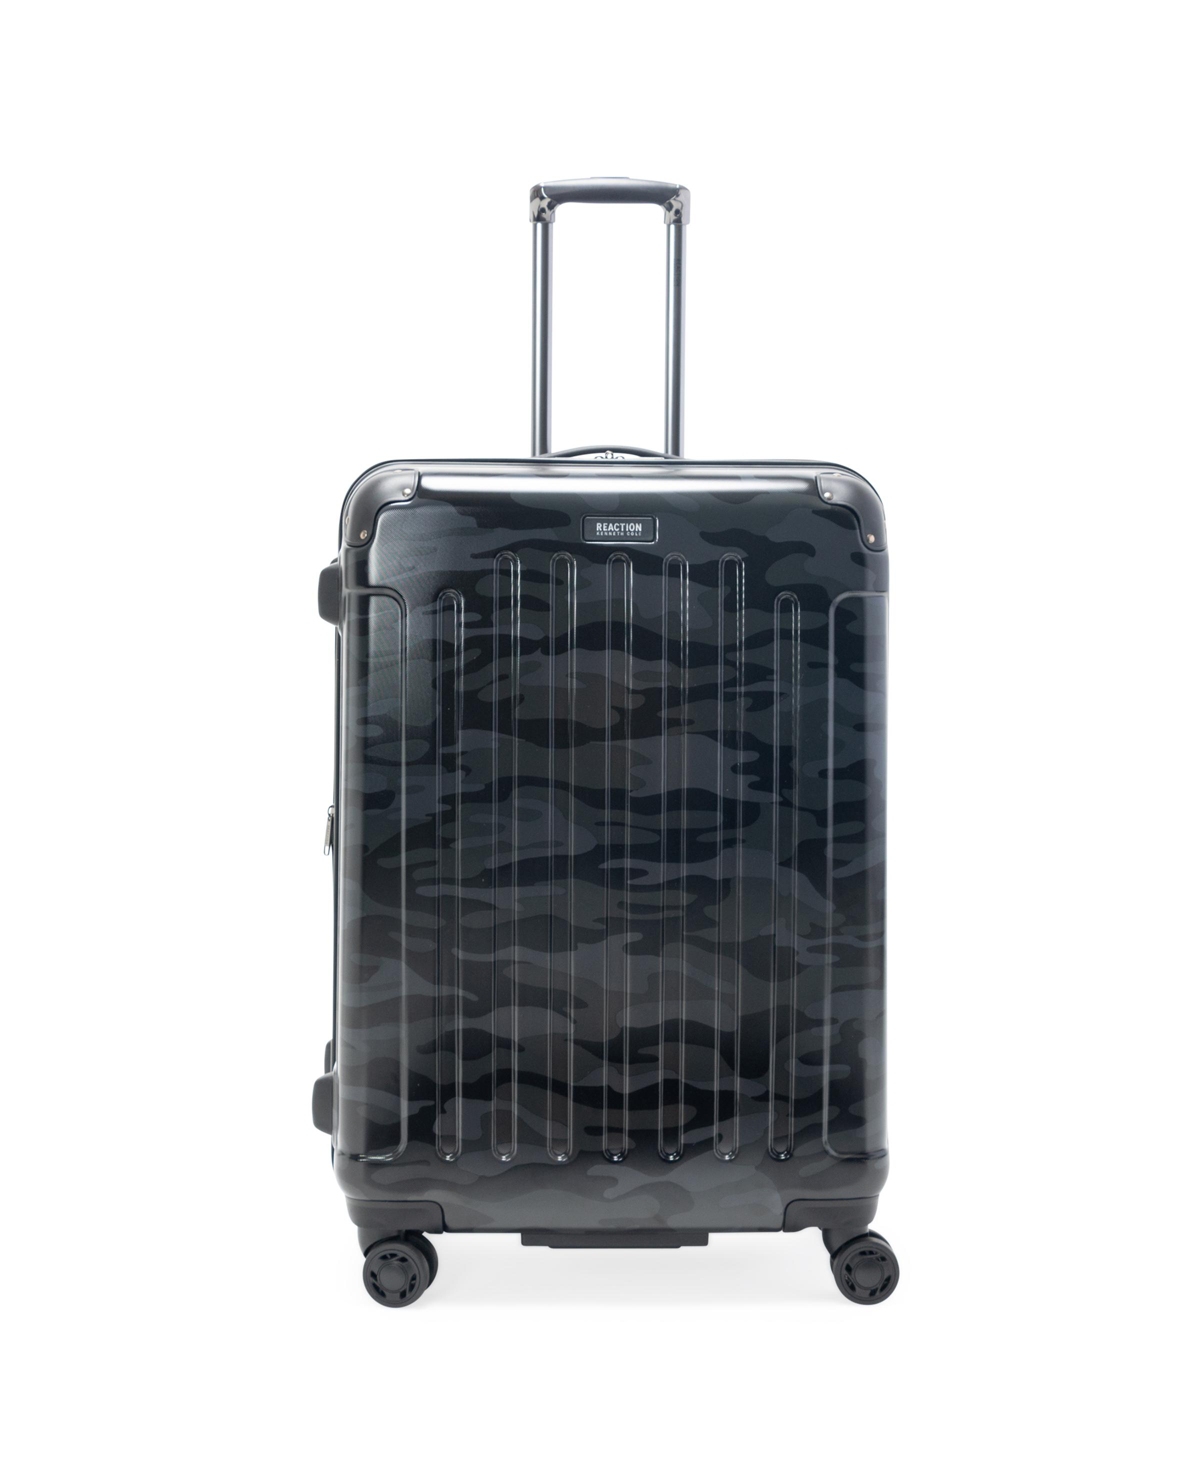 Kenneth Cole Reaction Renegade Camo 24" Hardside Expandable Luggage In Camo Black